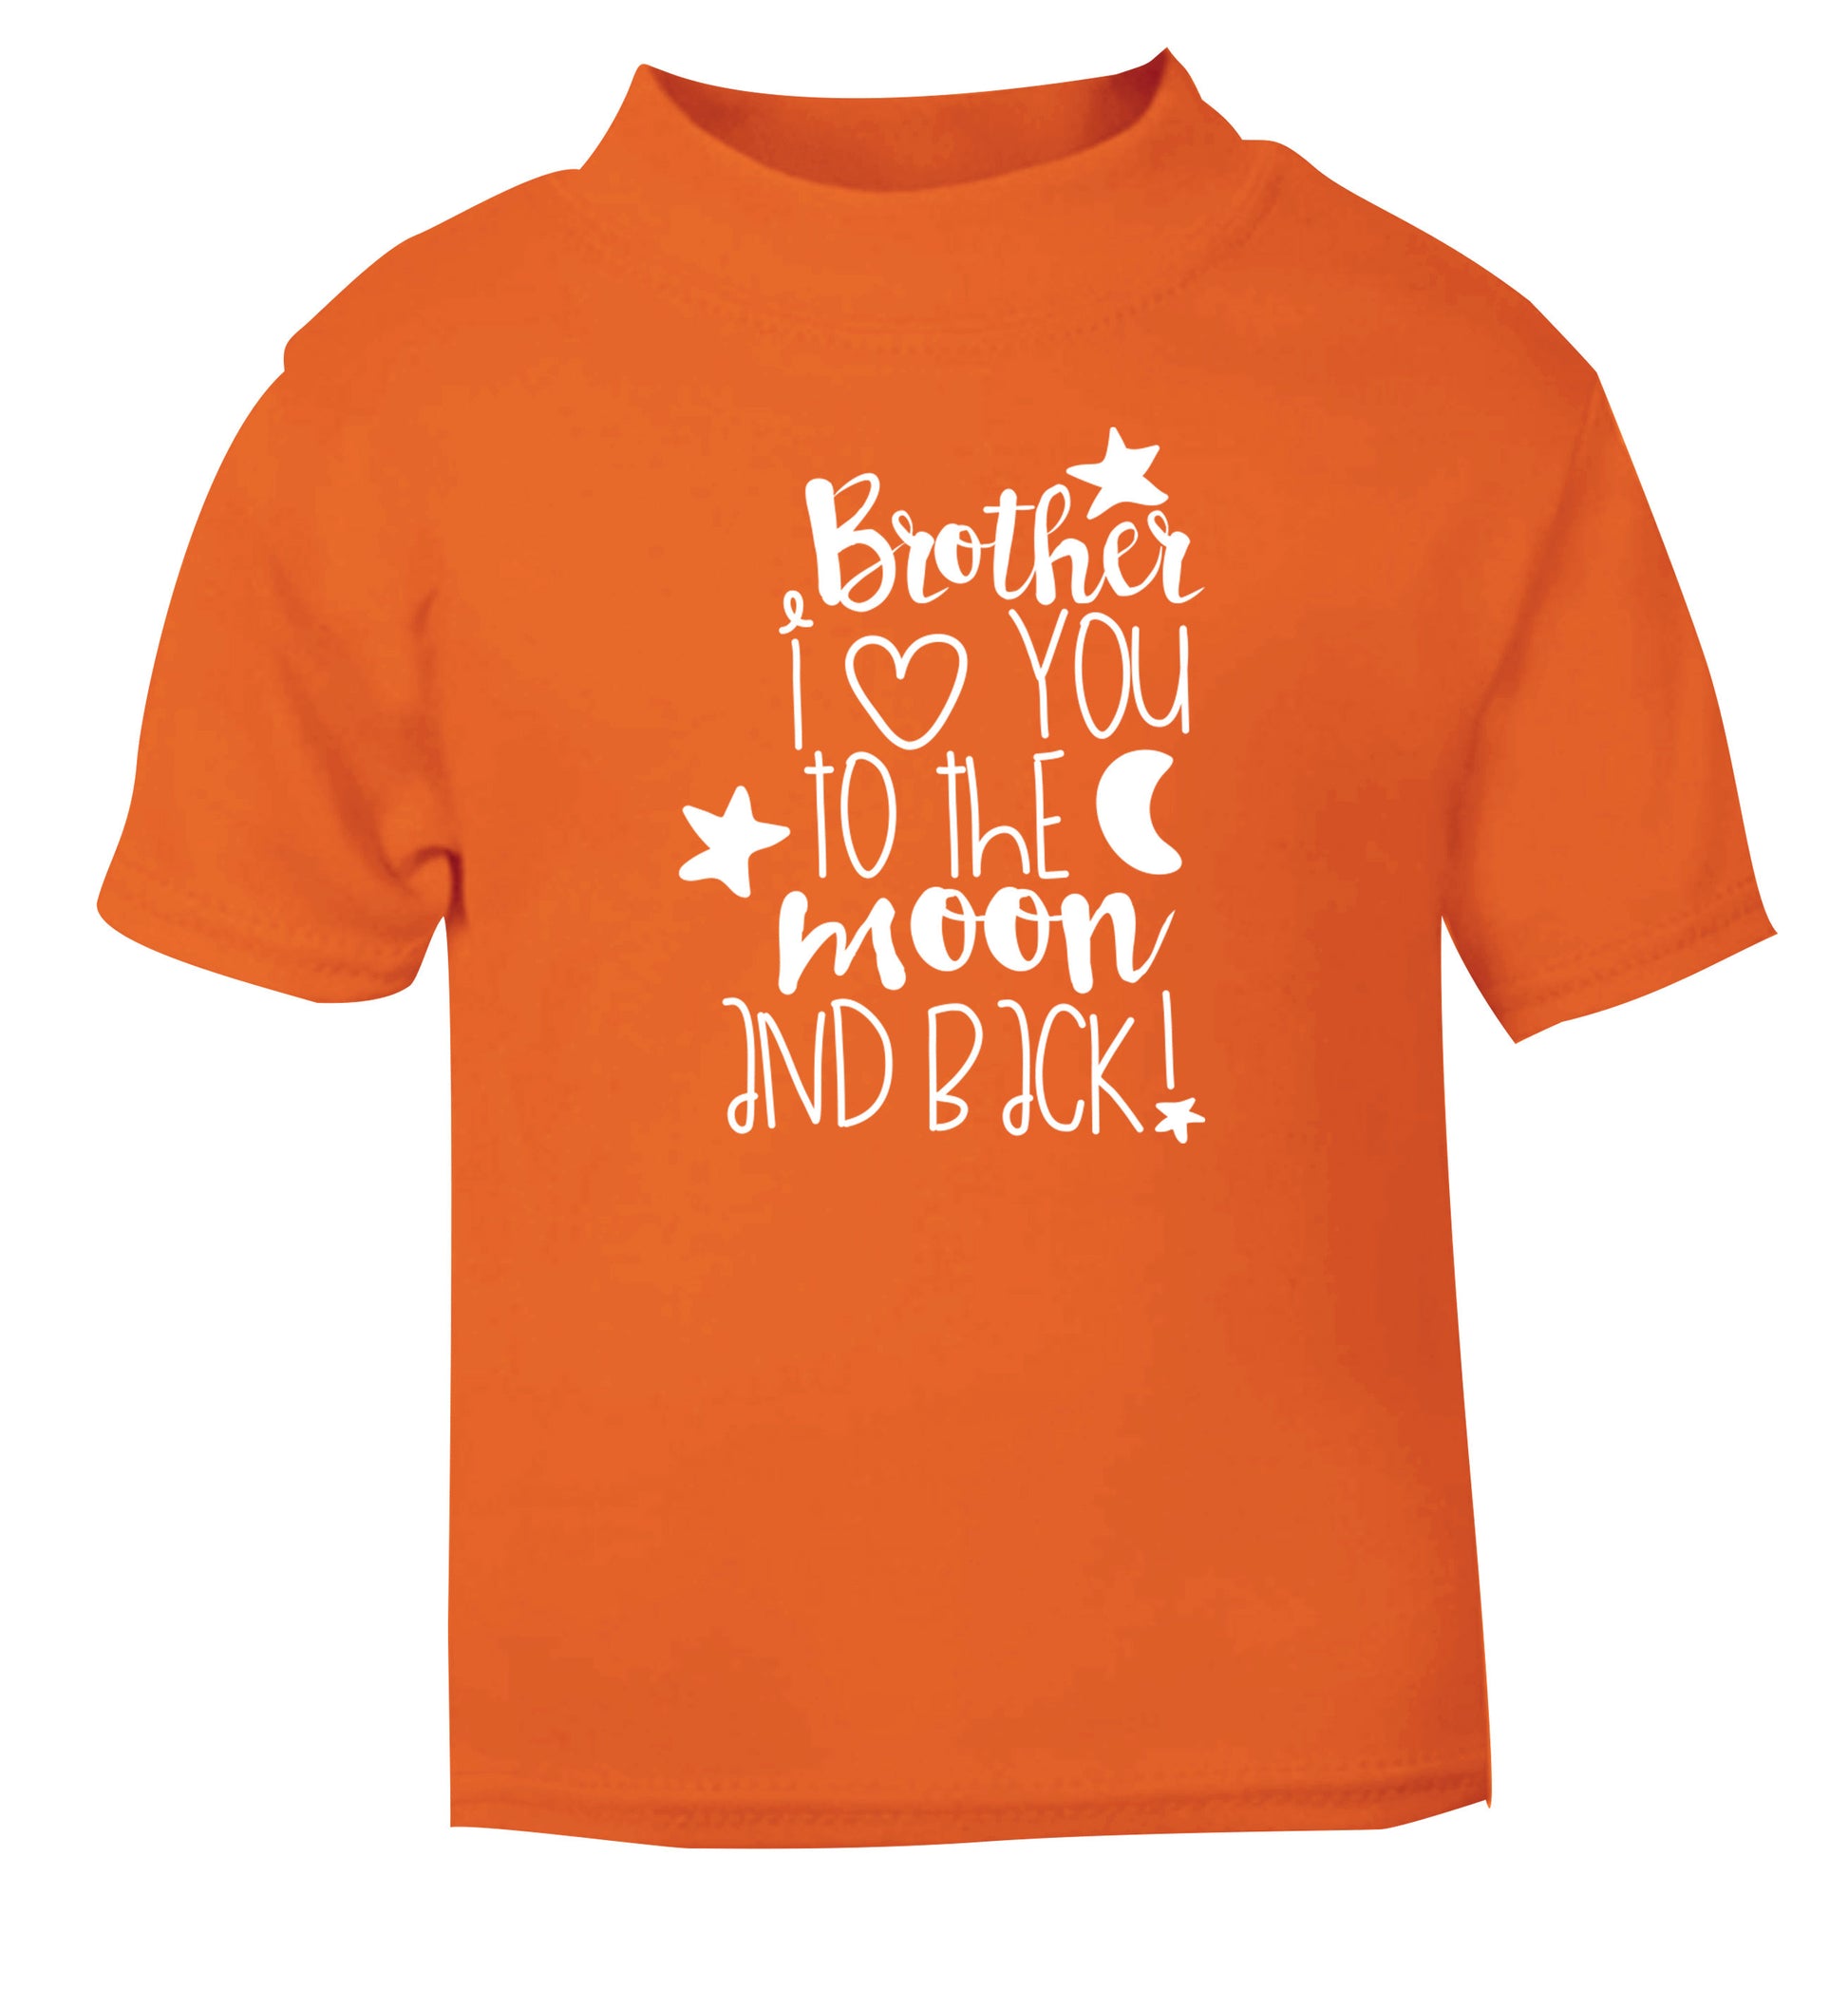 Brother I love you to the moon and back orange Baby Toddler Tshirt 2 Years